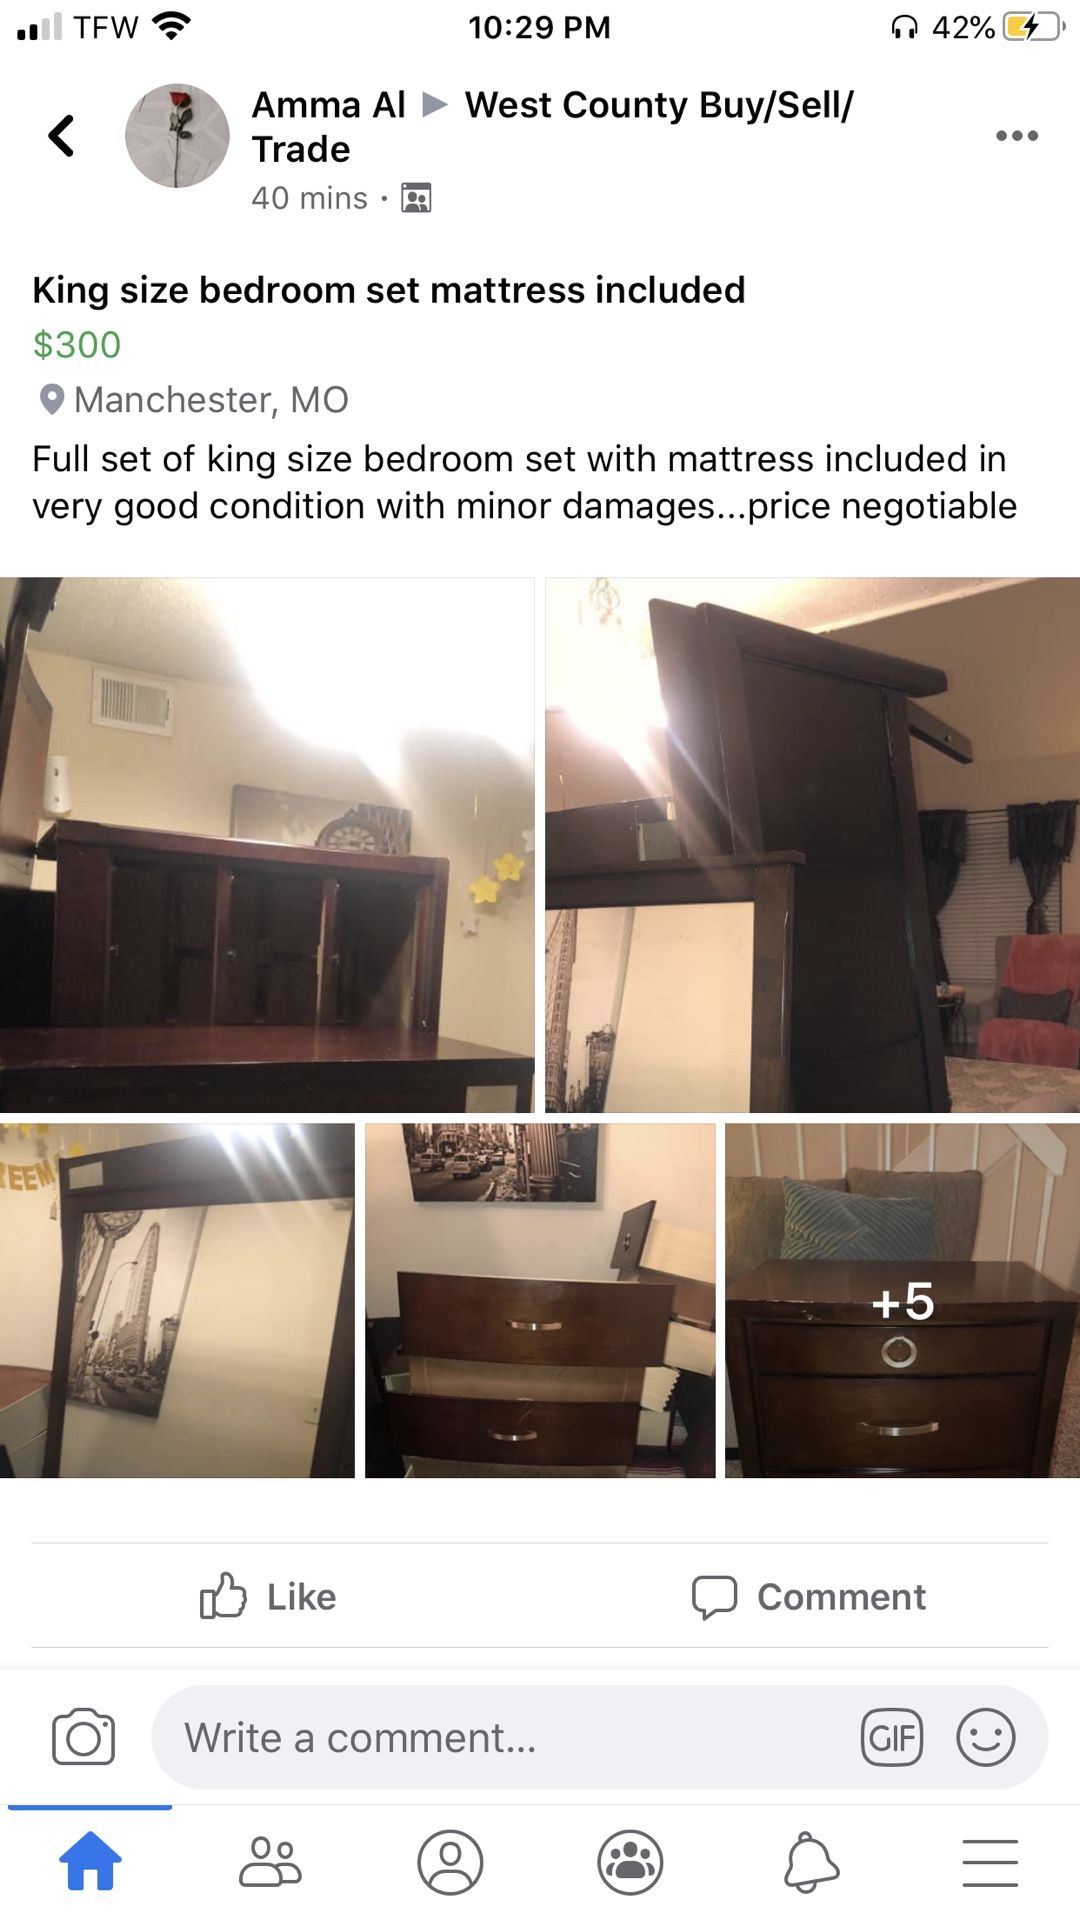 King size bedroom set without mattress